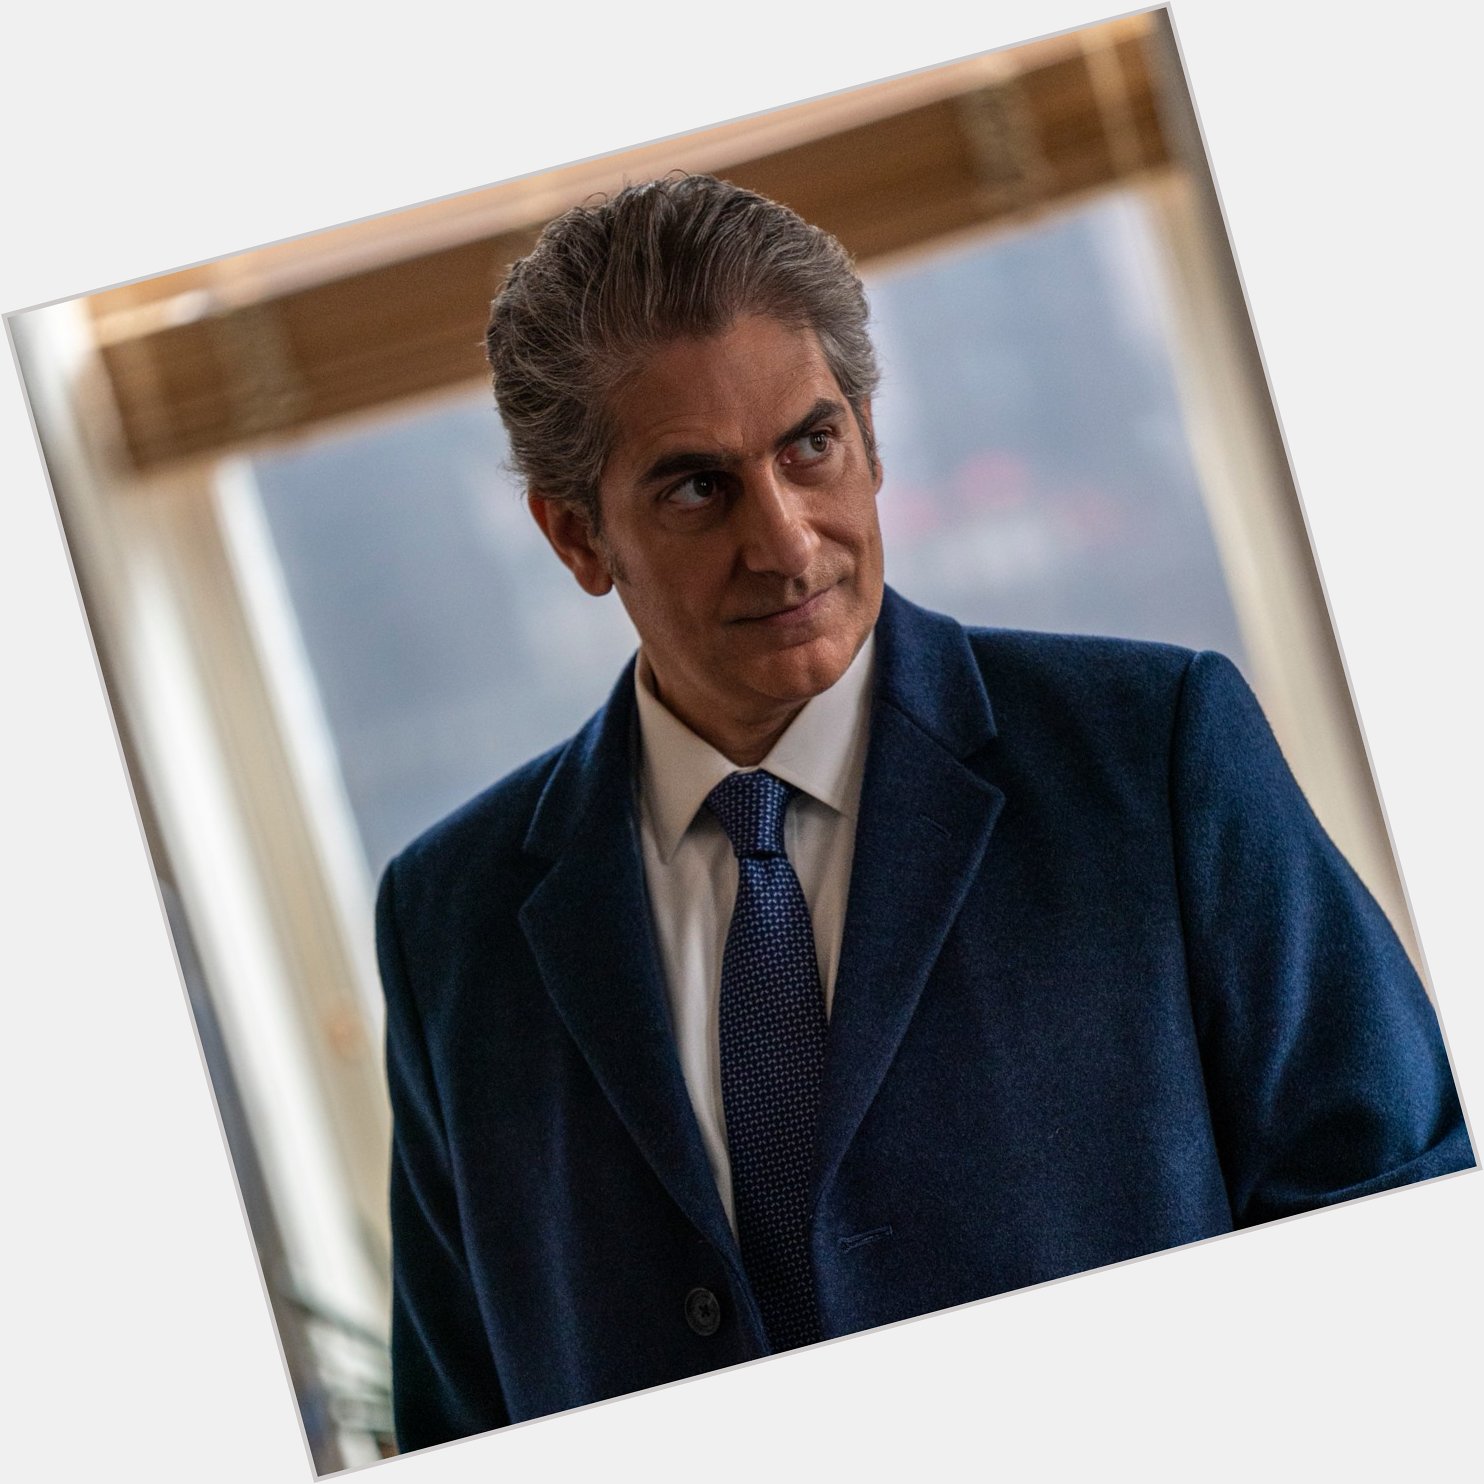 We\re honored to have him as Sellitto. Happy birthday, Michael Imperioli! 